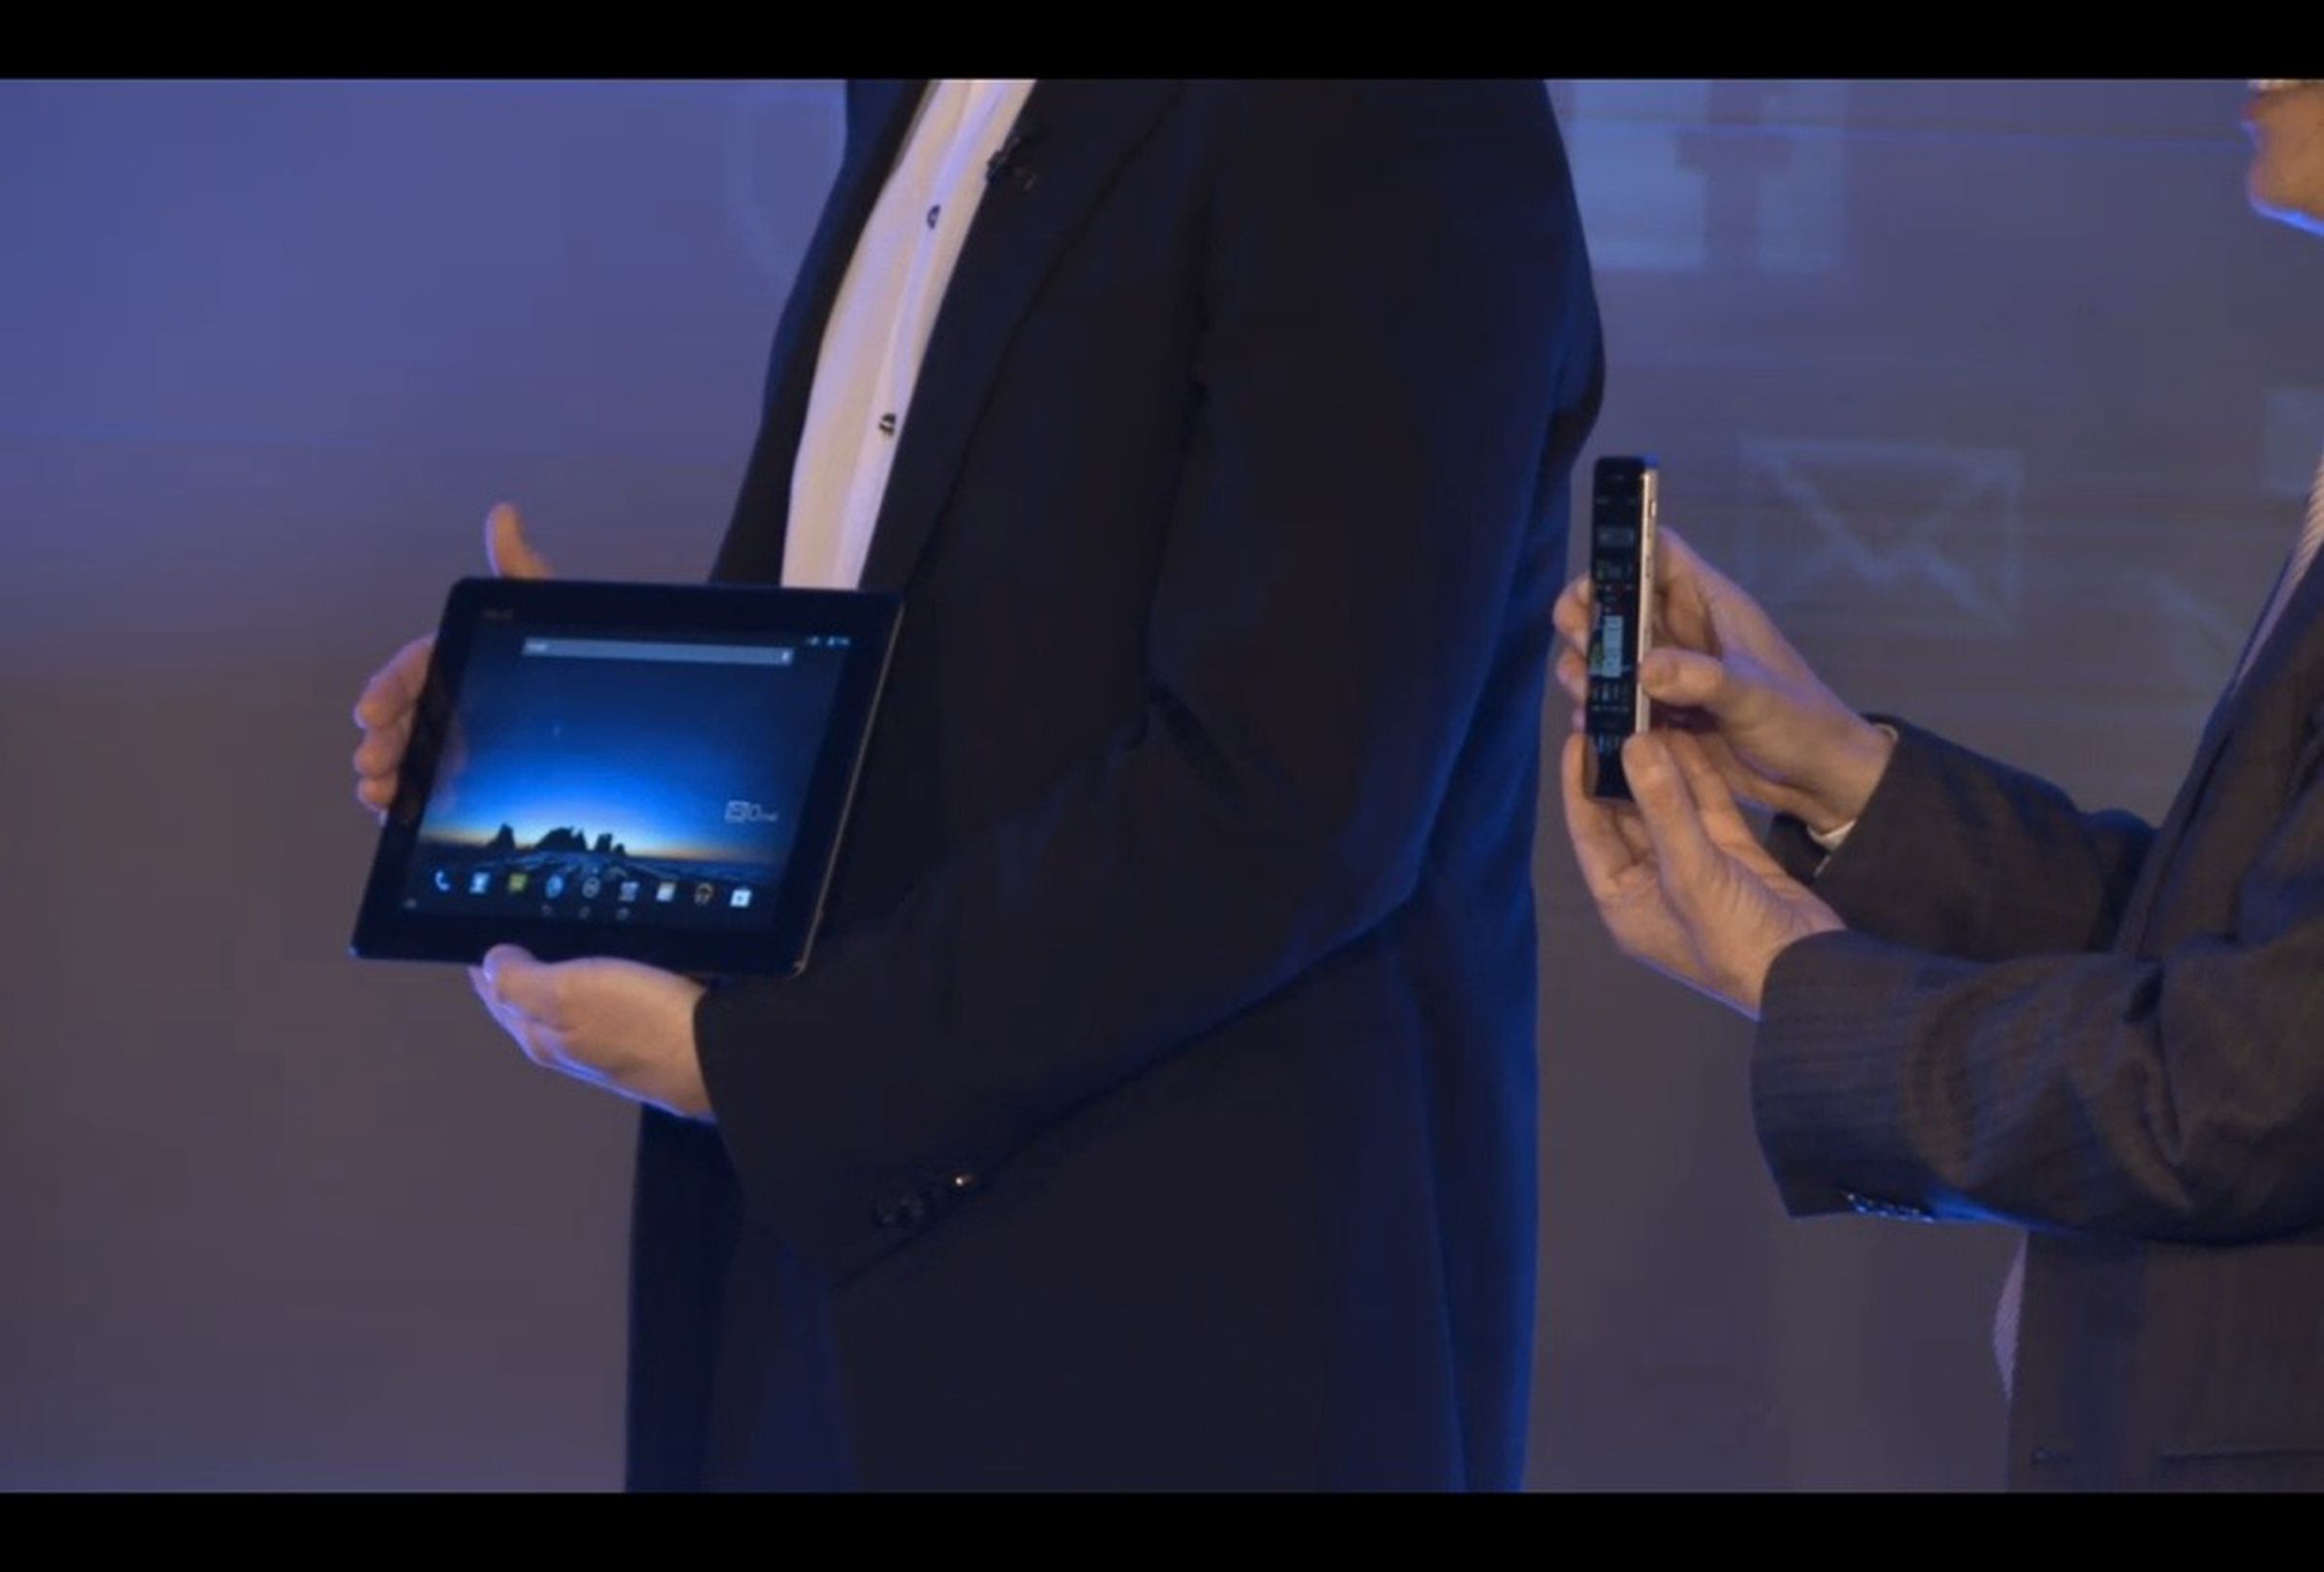 Asus Padfone Infinity livestream pictures